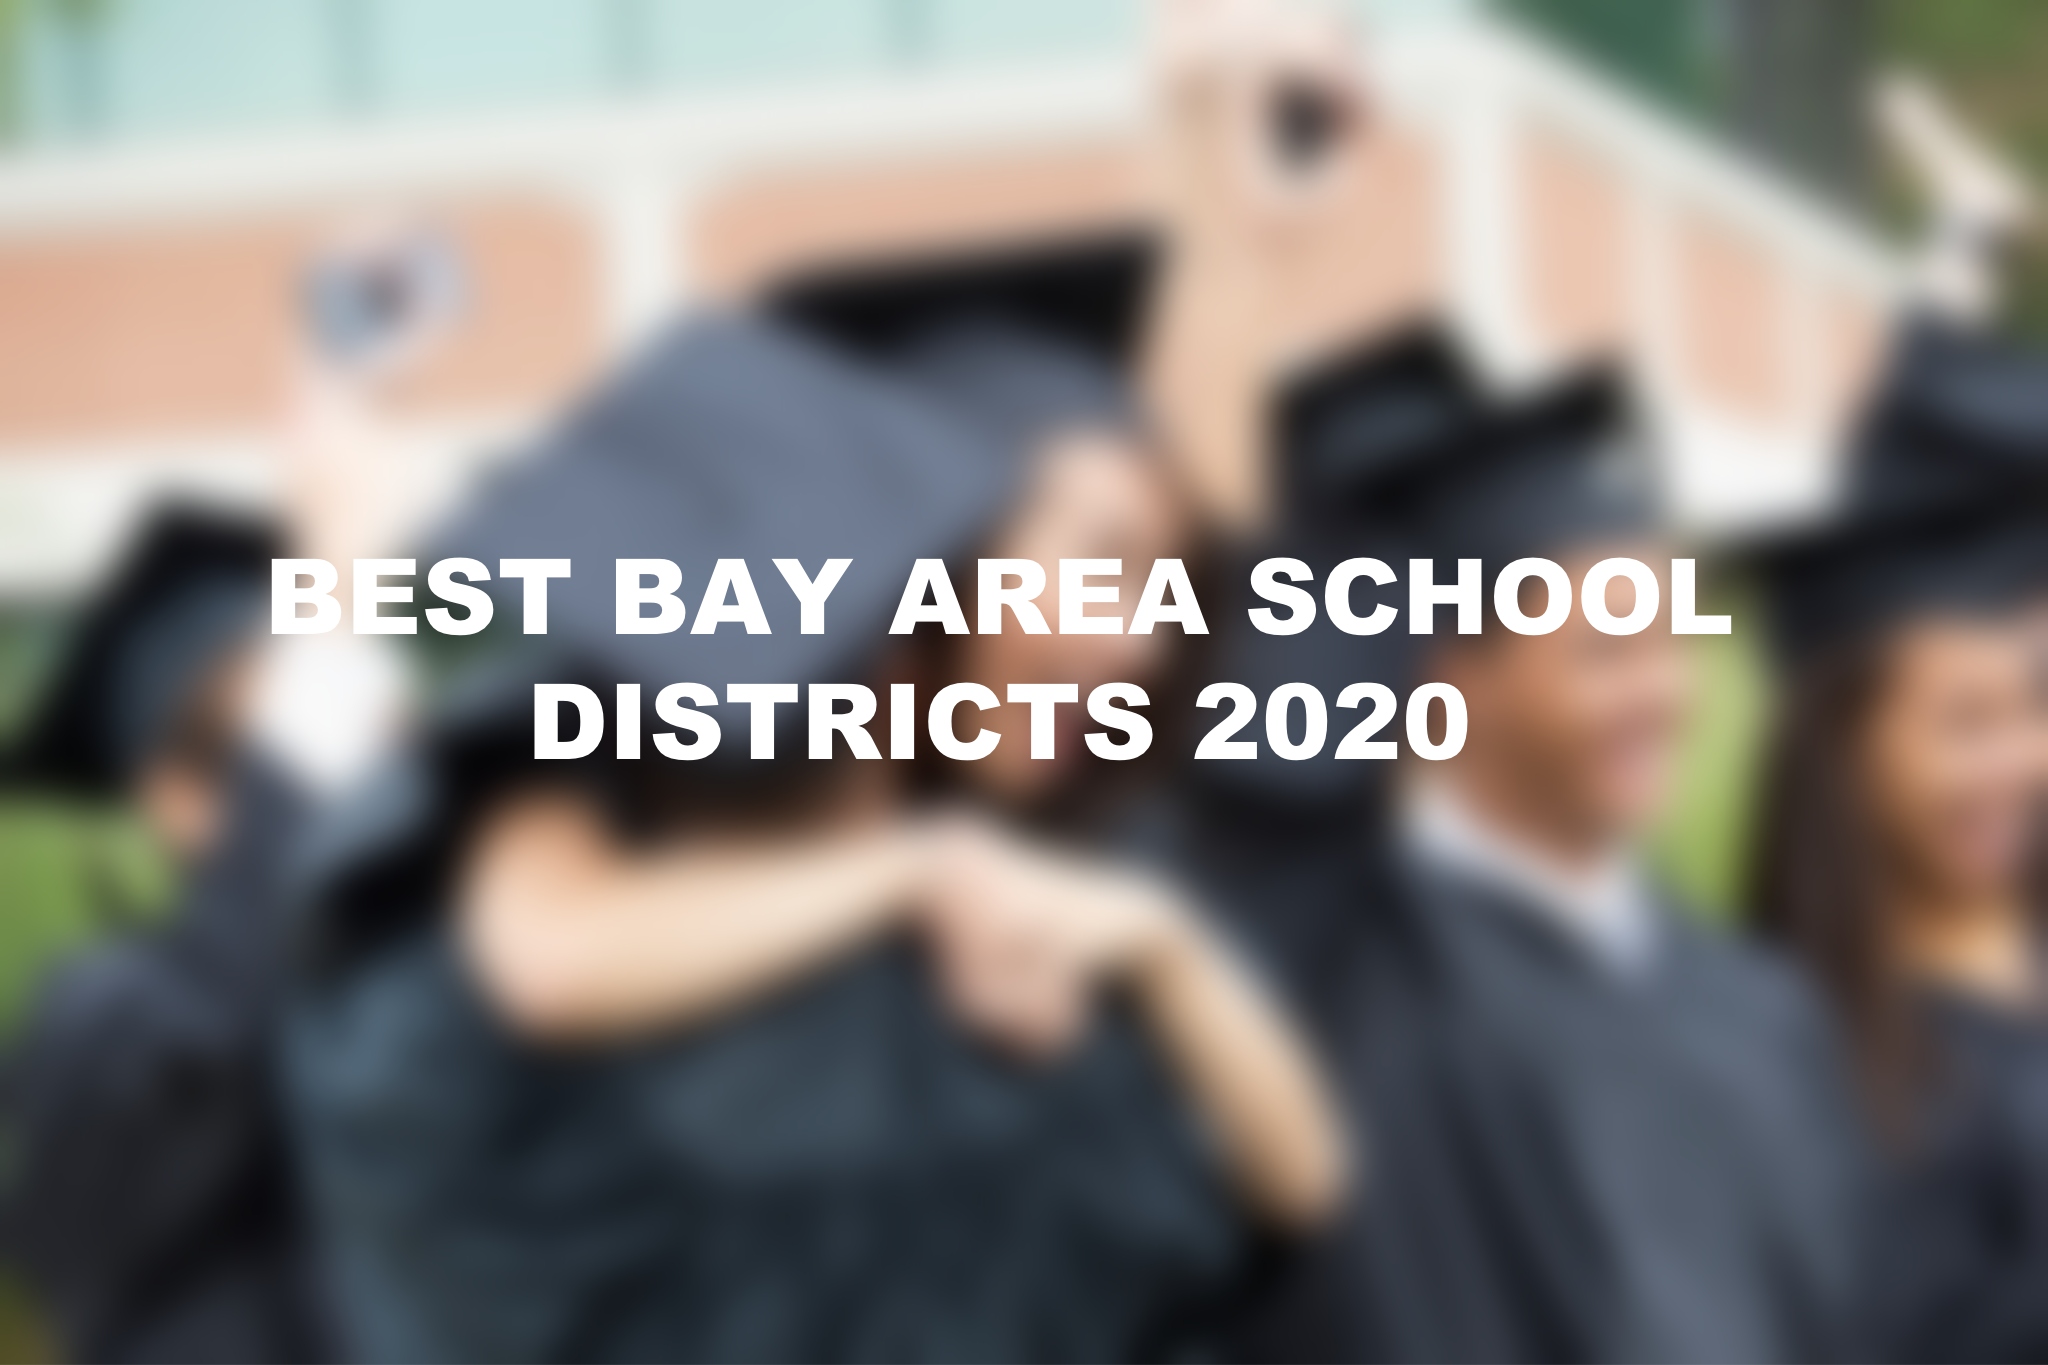 The Best Bay Area School Districts For 2020 According To